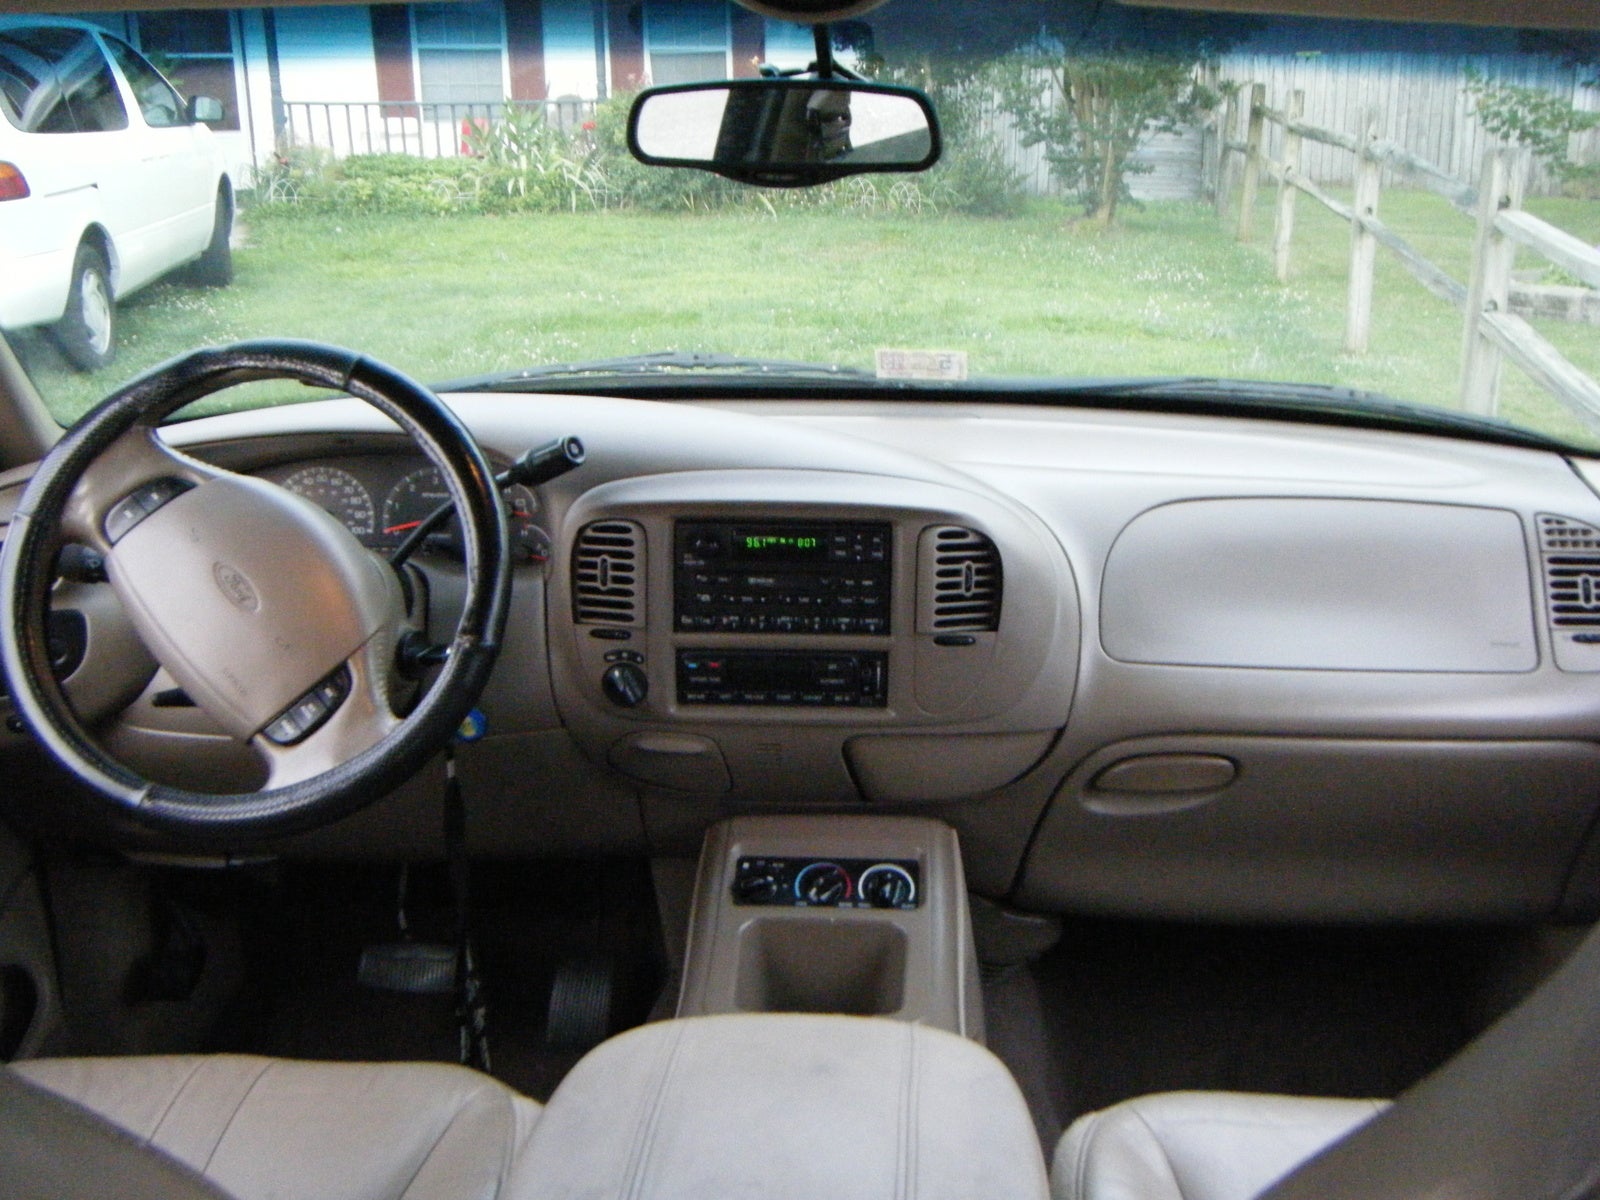 2000 Ford expedition interior dimensions #5